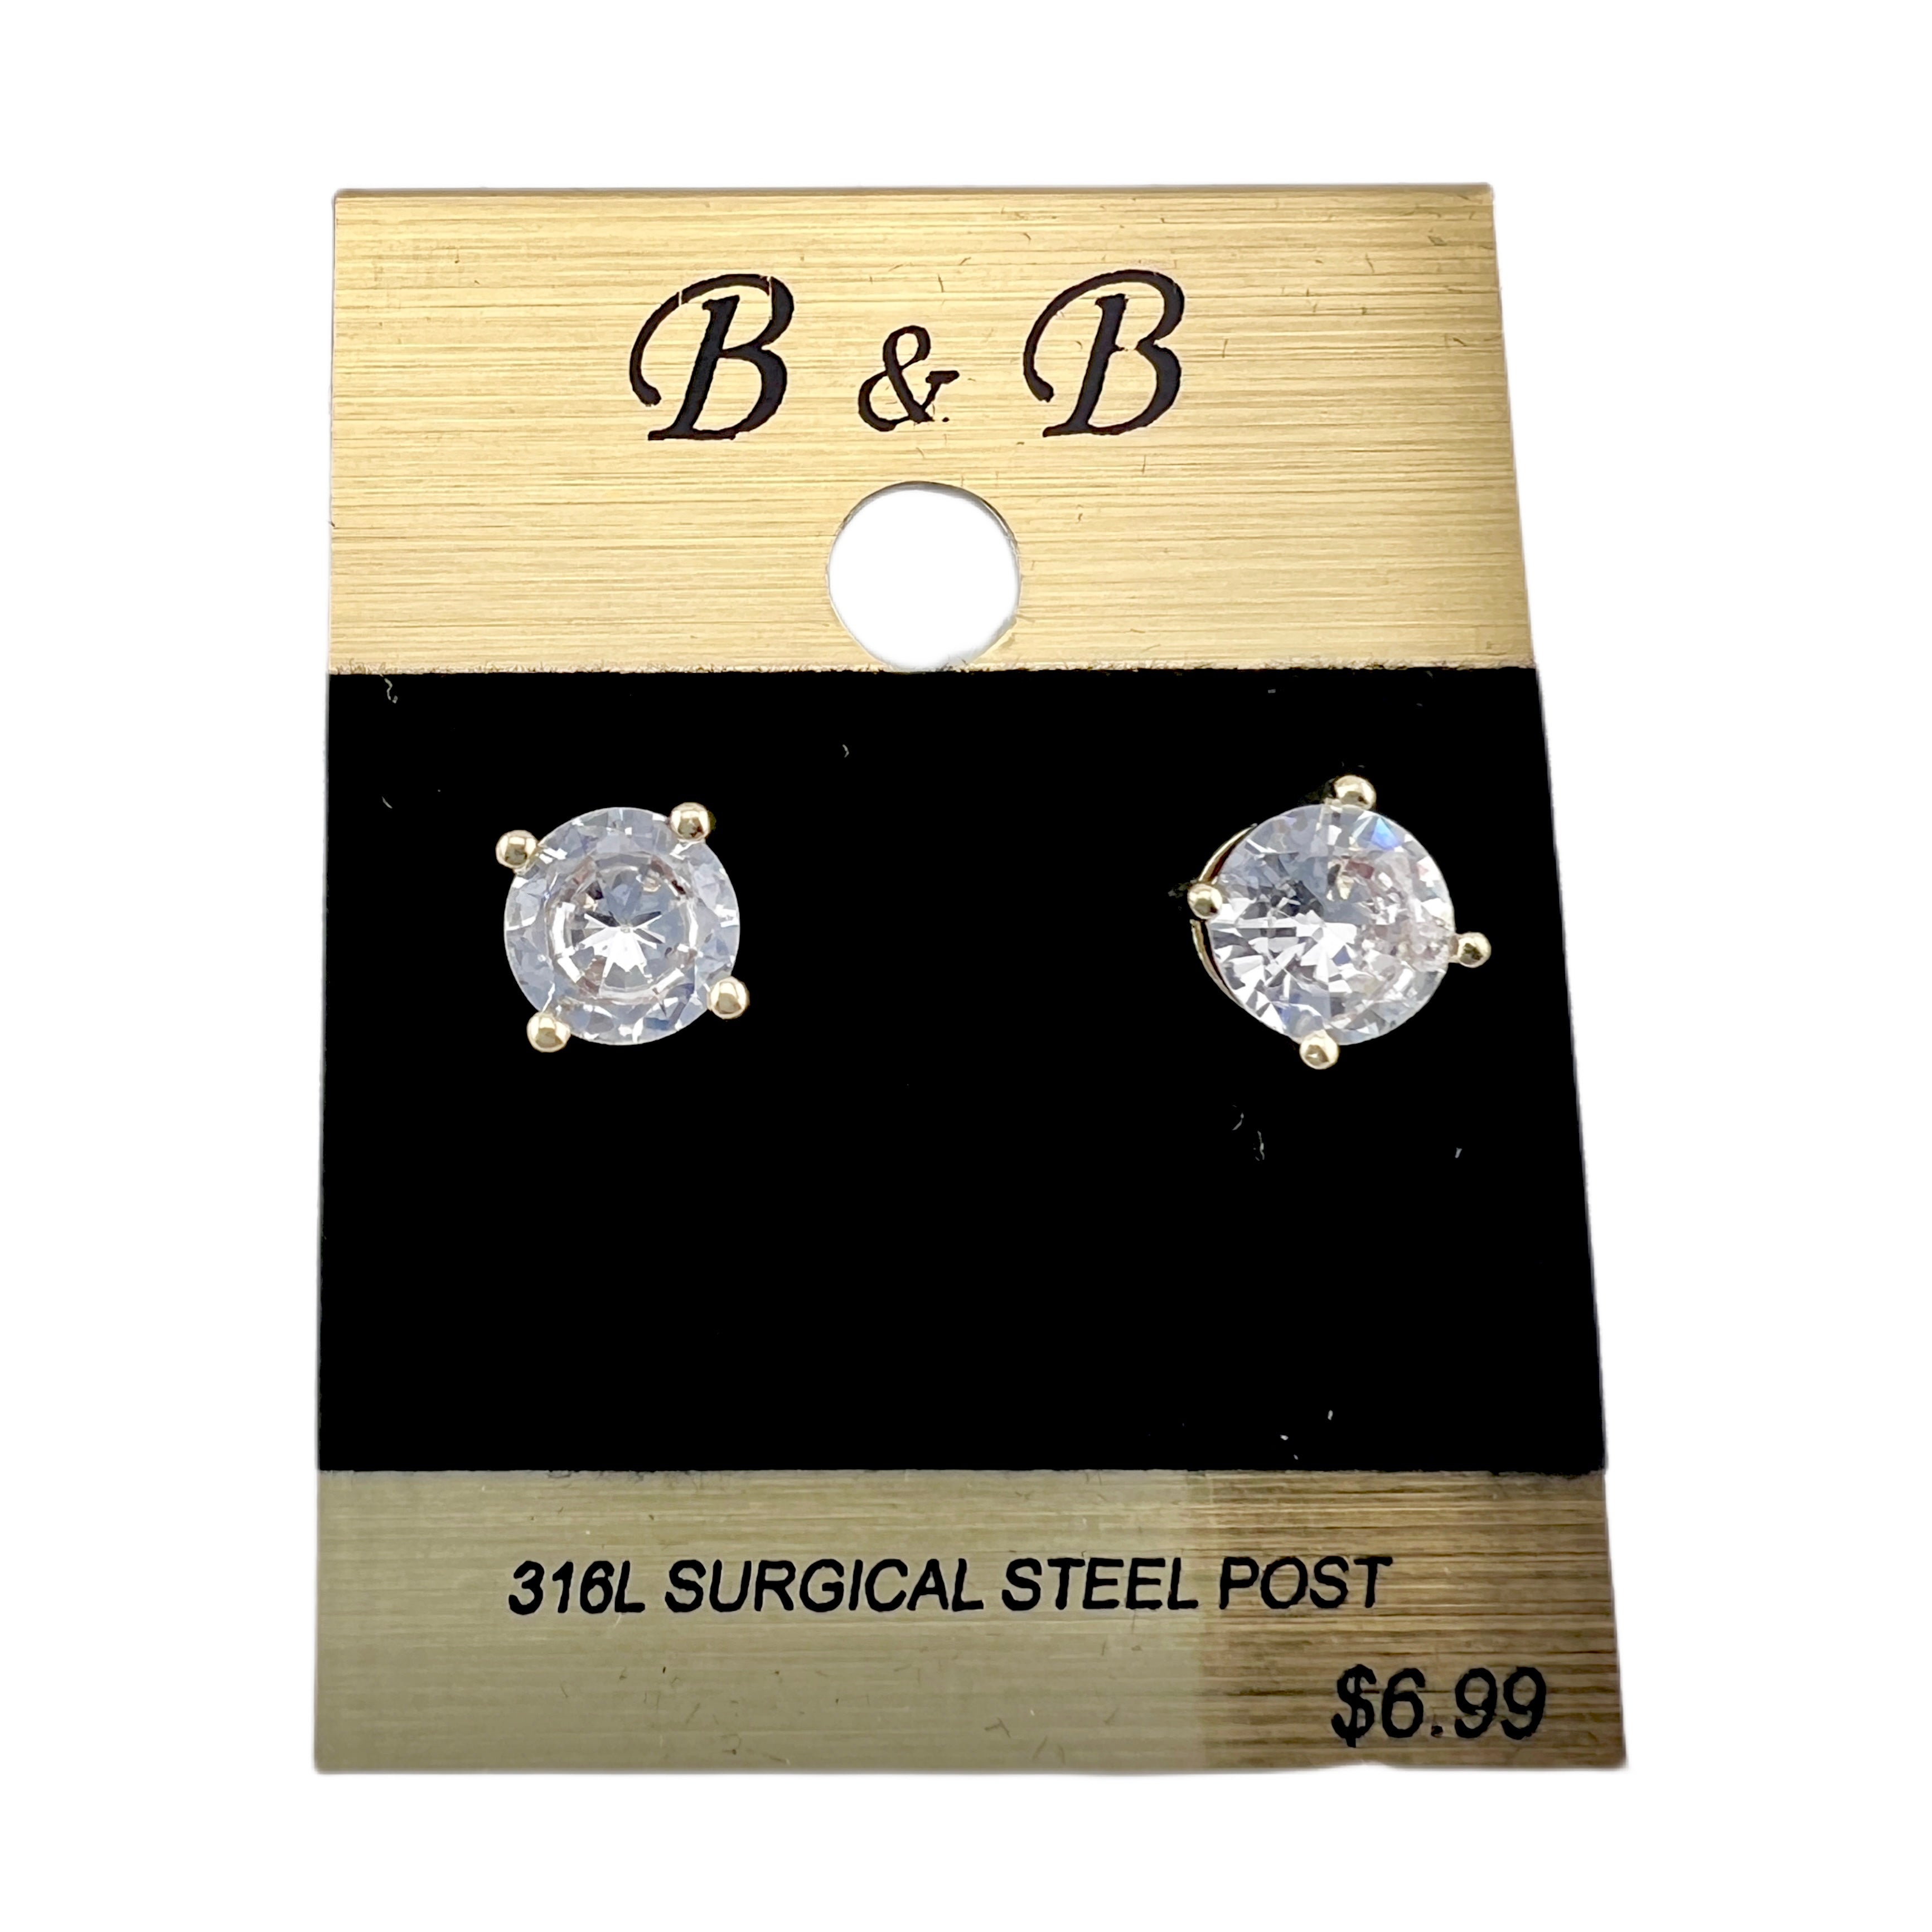 B&B Gold Color Cubic Zirconia Round Stud Earrings